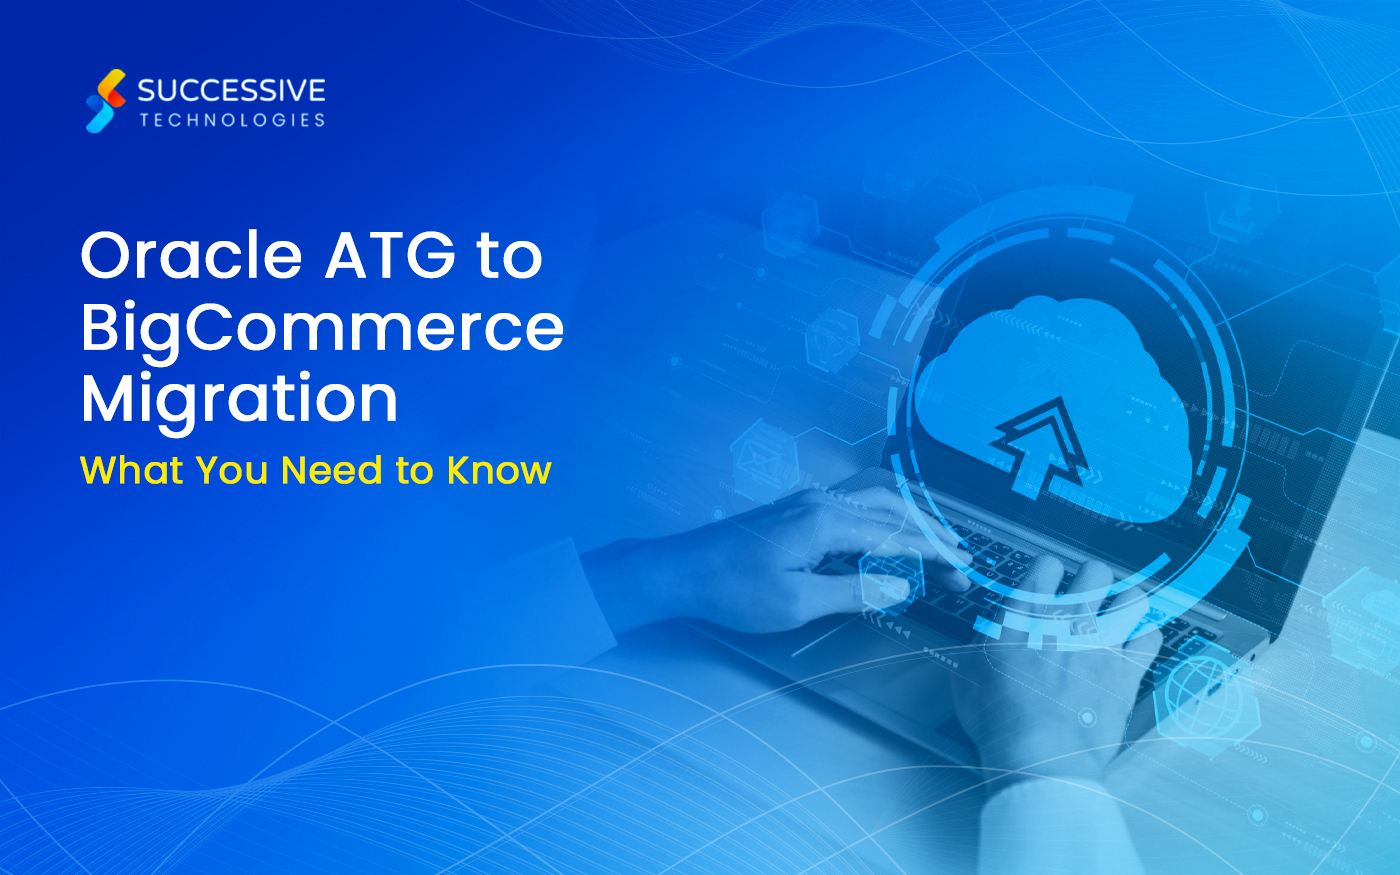 Oracle ATG to BigCommerce Migration: What You Need to Know